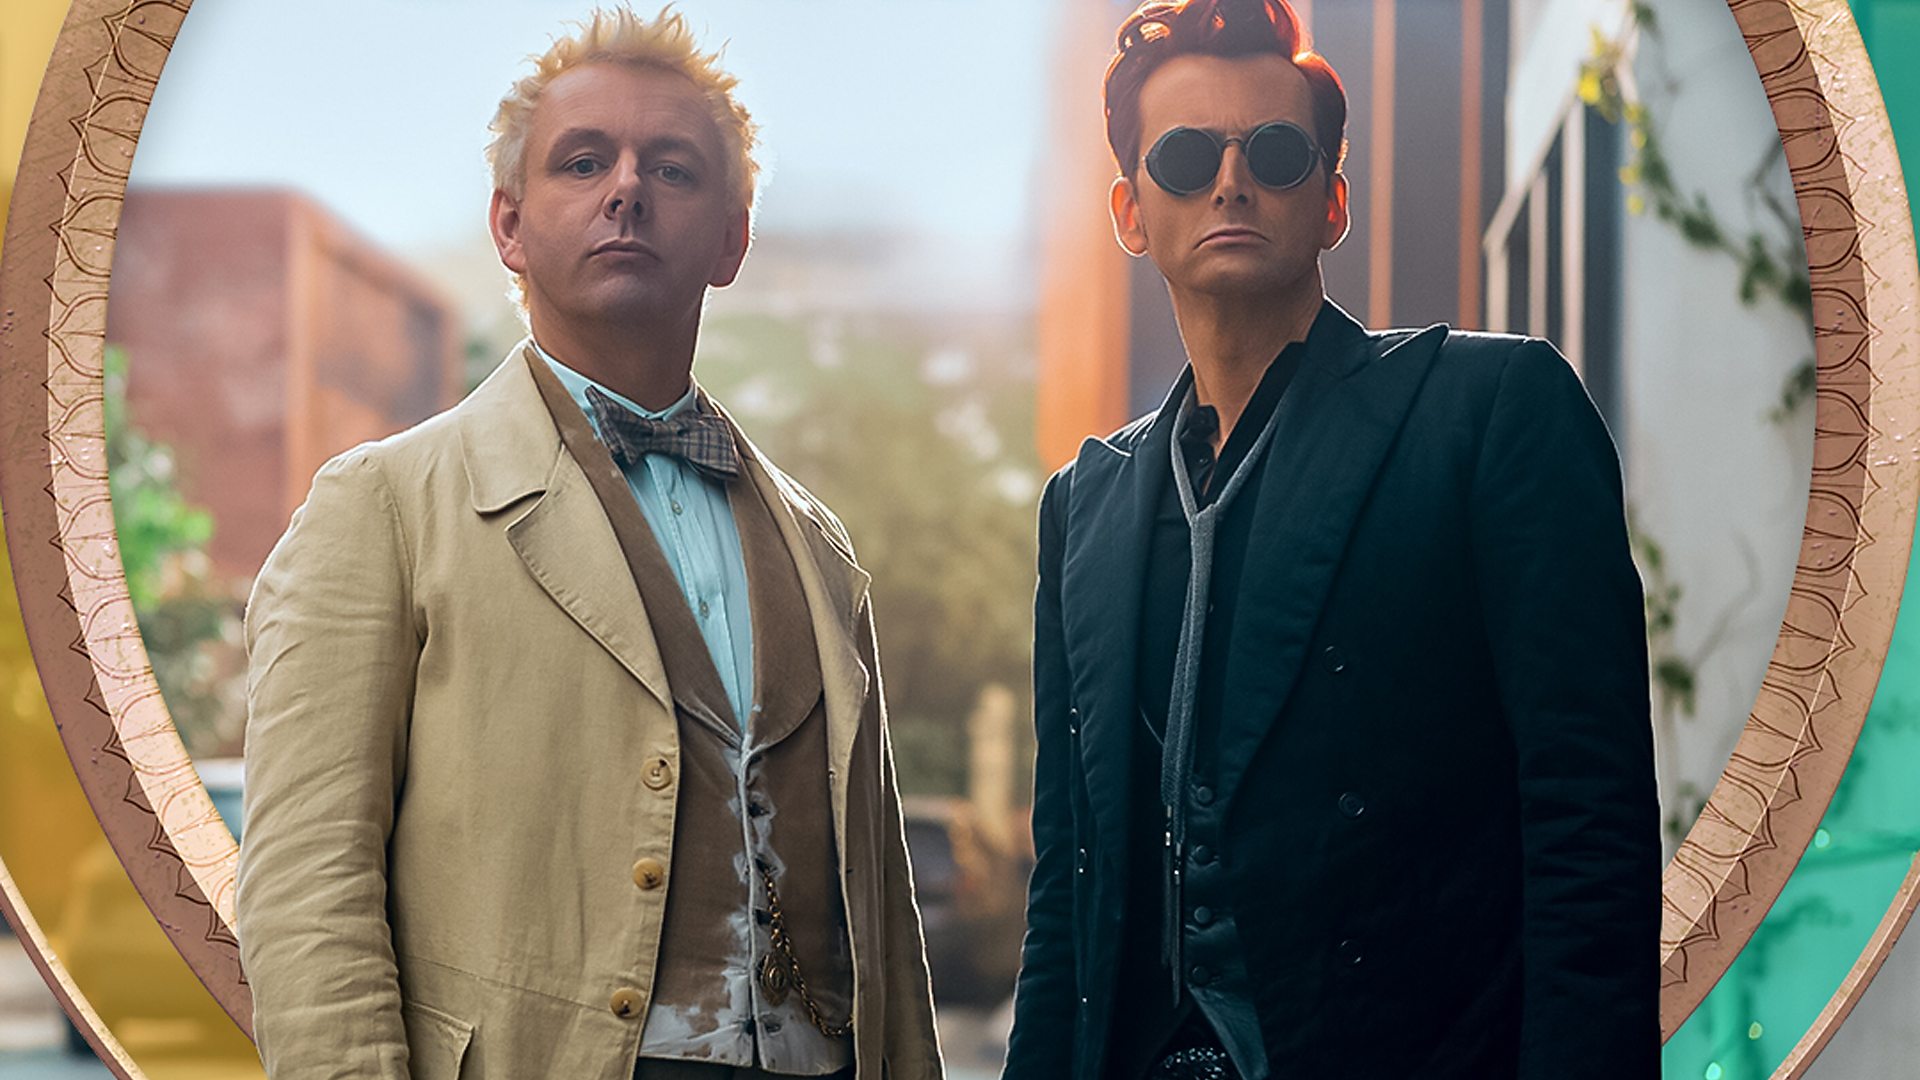 Global hit TV show Good Omens to shoot entire Second Series in Scotland